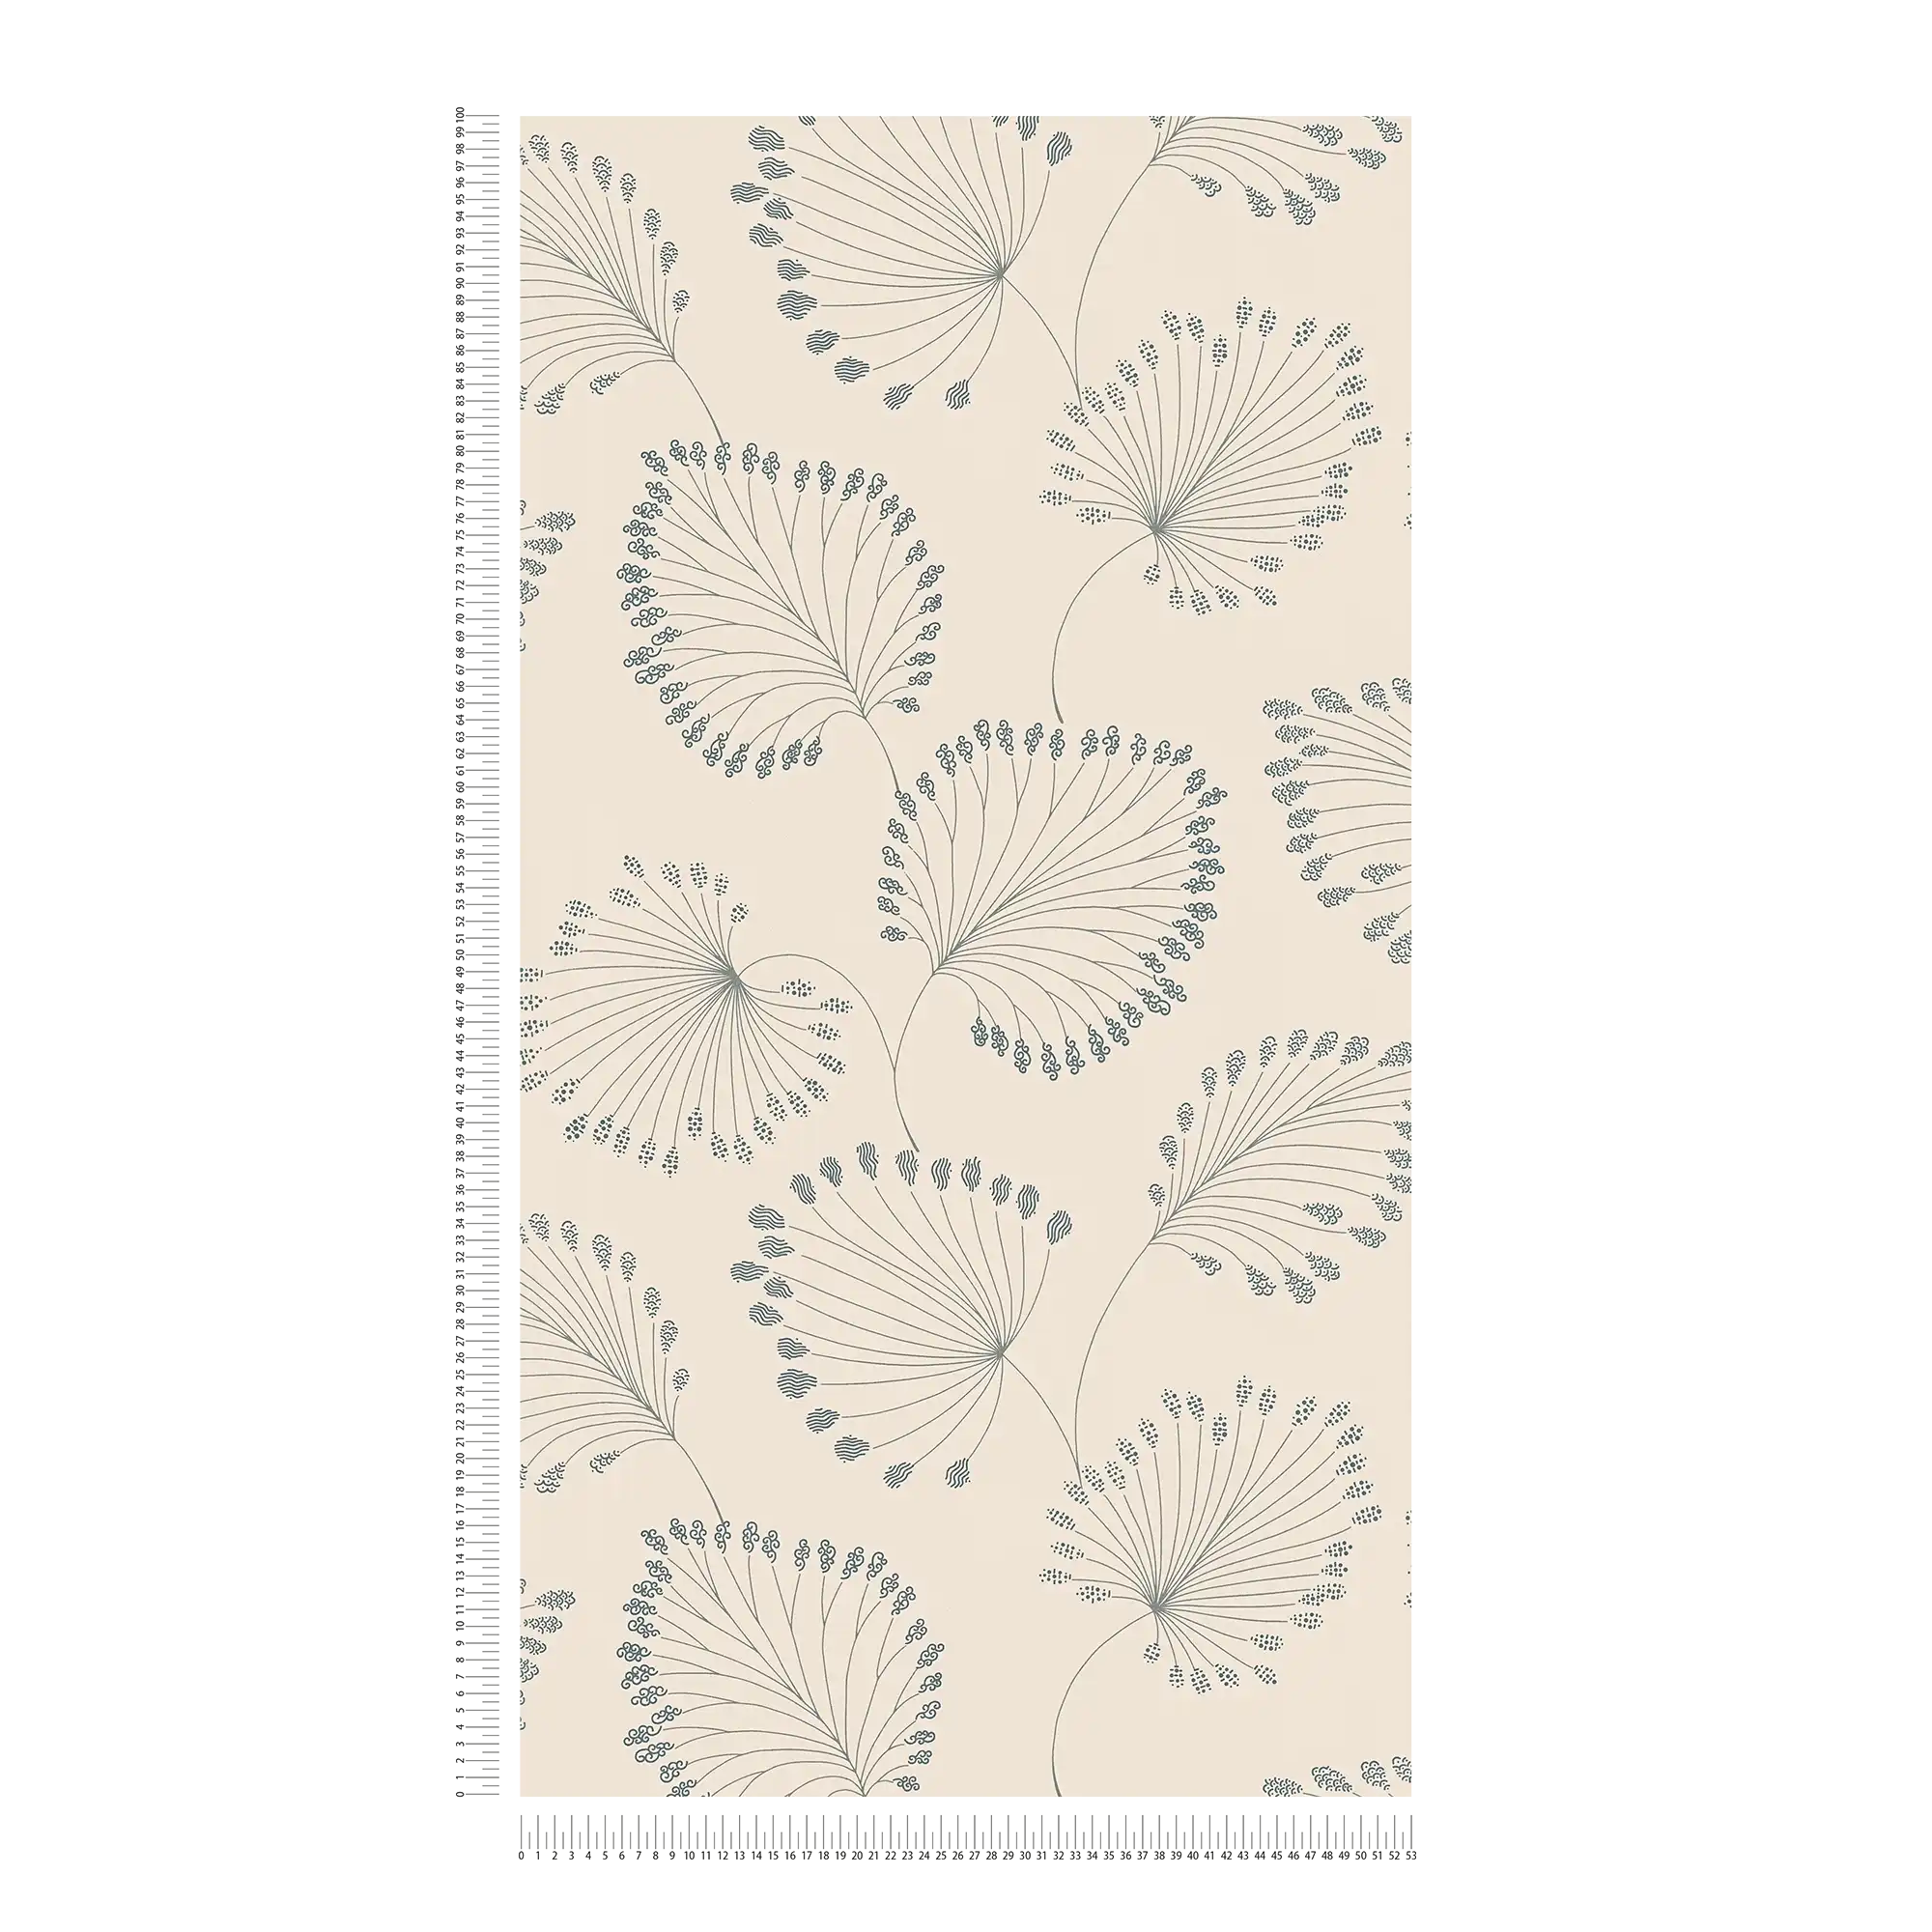             Wallpaper leaf motif abstract with metallic accents - beige, grey
        